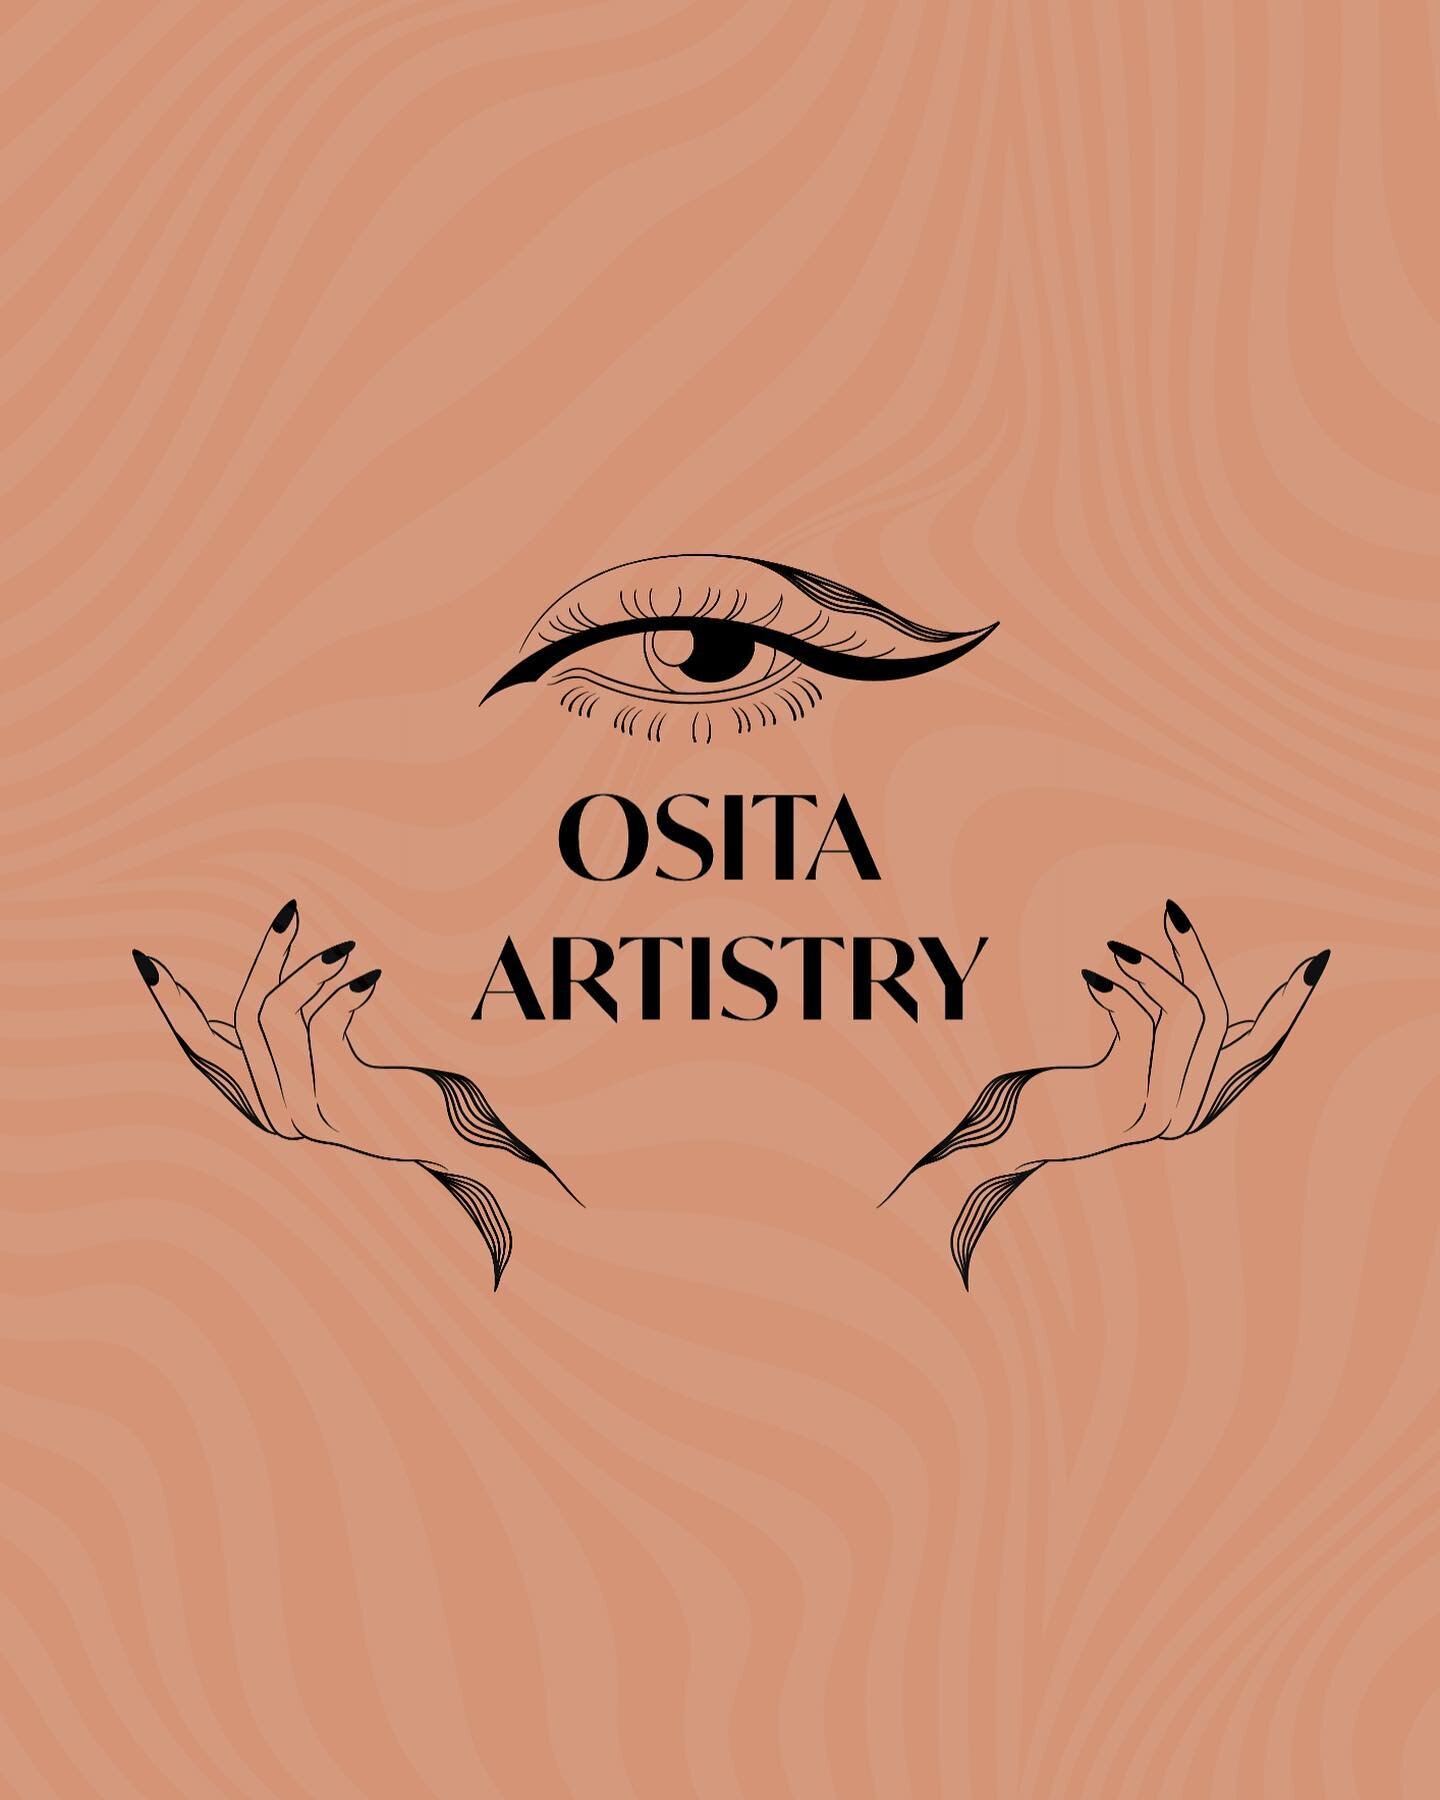 🪩 WELCOME TO OSITA ARTISTRY 🪩
2023 is the year of power moves, so I&rsquo;m putting on my boss-bish-business hat and am announcing you can now find me every weekend at the beautiful @cosmelle_ salon! That&rsquo;s right, your gal is going freelance,